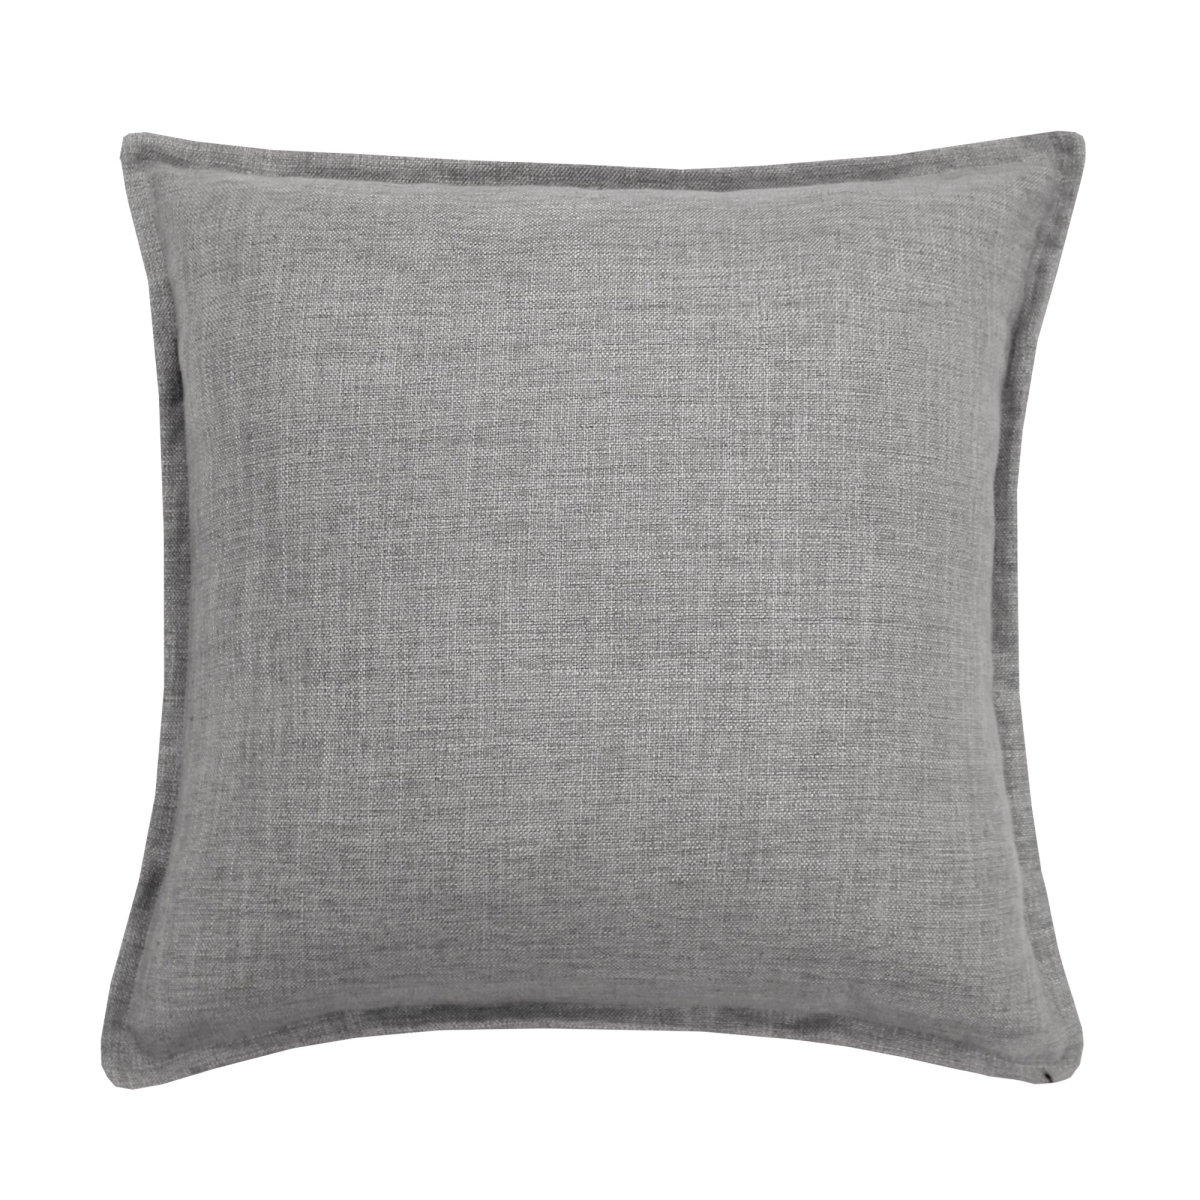 Sq-pi-ligry-1818 18 X 18 In. Linen Decorative Cushion, Grey - 100 Percent Polyester